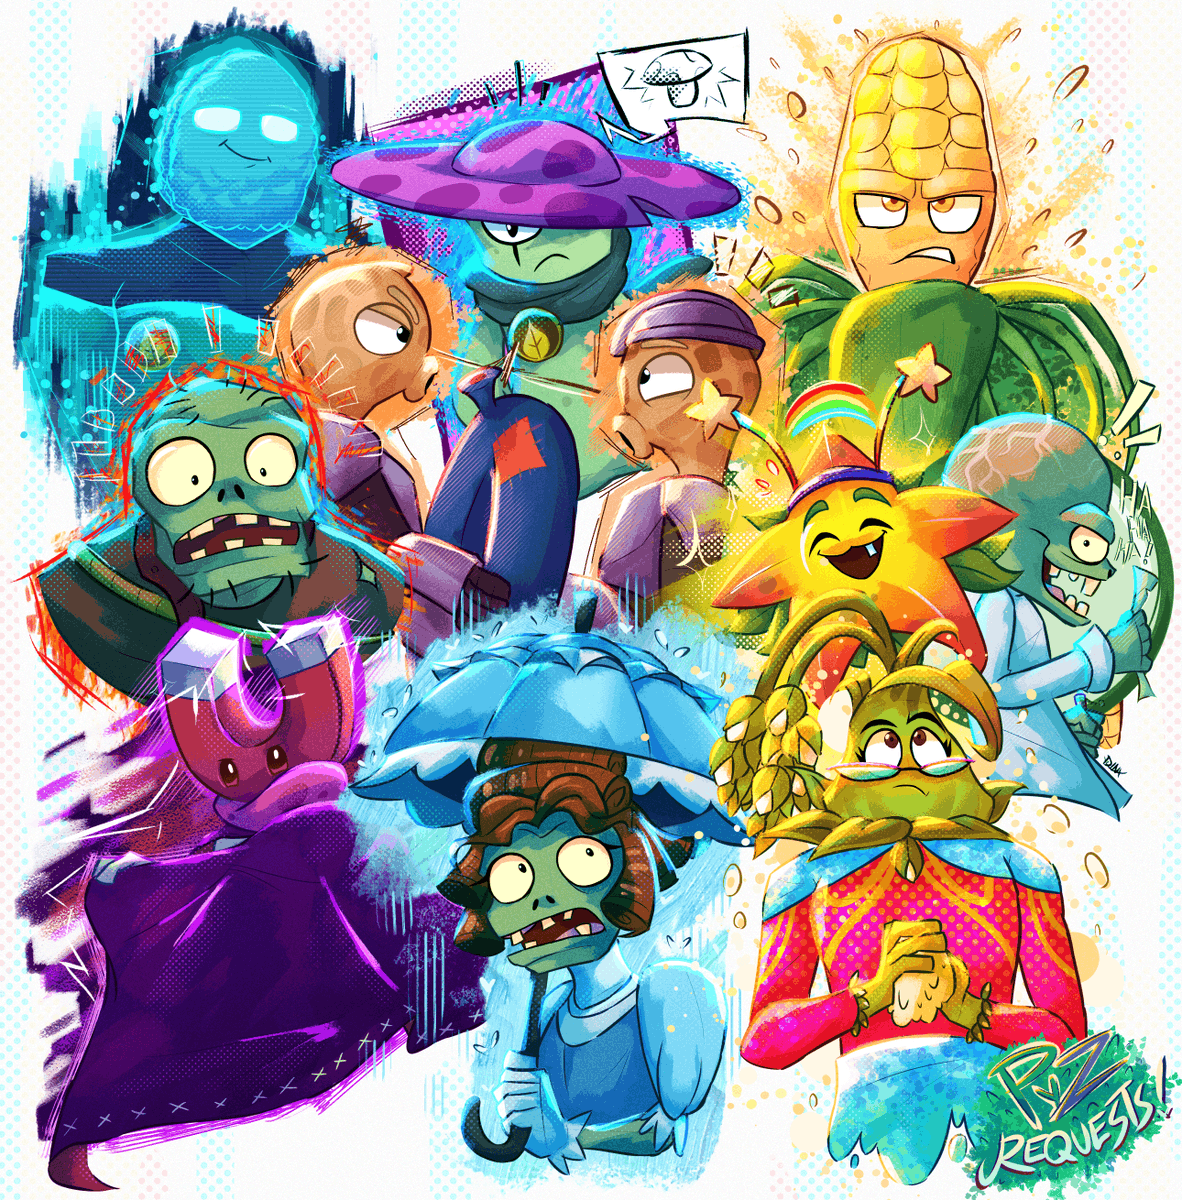 Plants VS Zombies Requests! 🌻🧟‍♂️
Did some PVZ Requests! :D Had quite a lot of fun! ✨
#ArtistOnTwitter #DigitalArtist #plantsvszombies #plantsvszombiesfanart #pvz #PvZ2 #pvzfanart #pvz2fanart #pvzheroes